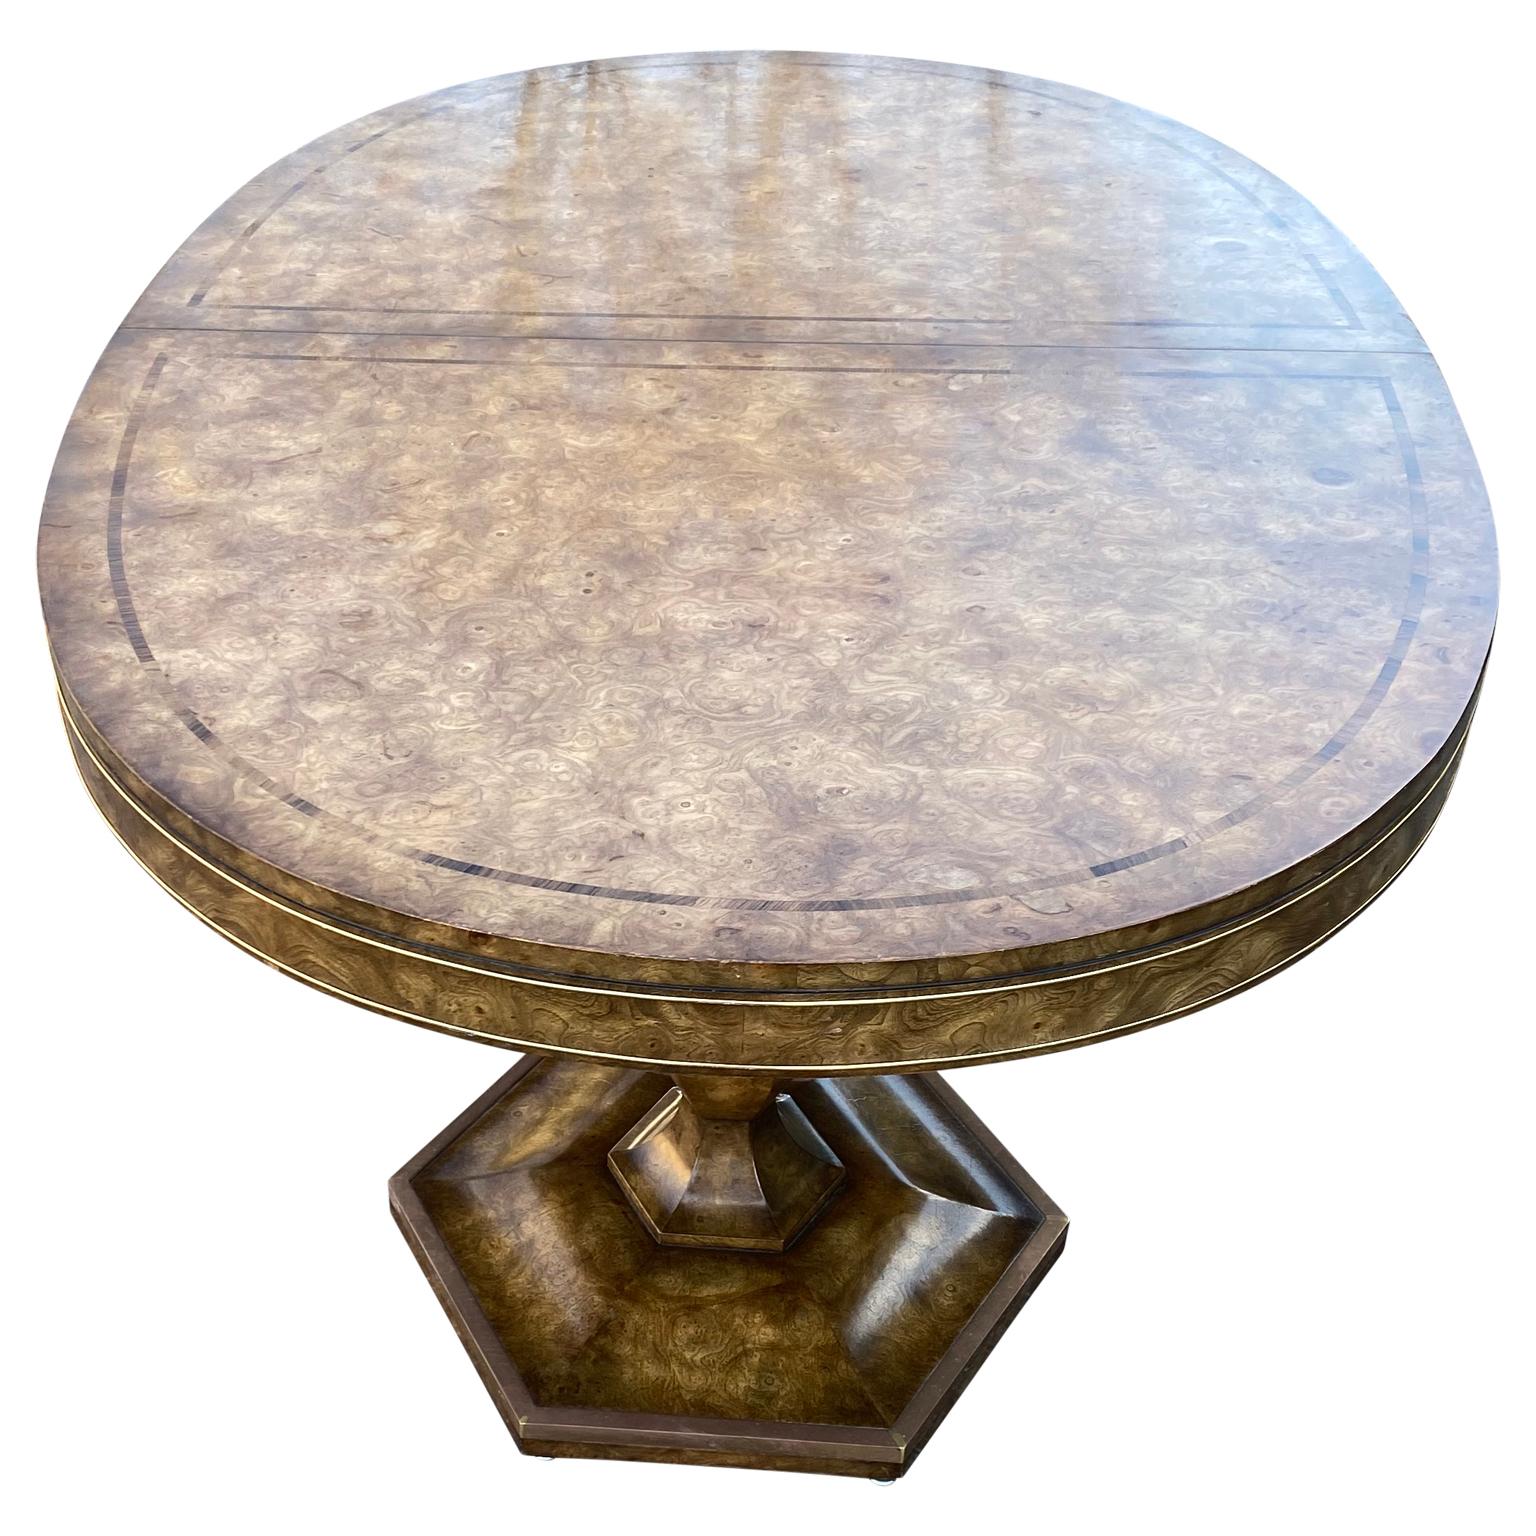 Large Mastercraft Dining Room Table In Burlwood And Brass In Good Condition For Sale In Haddonfield, NJ